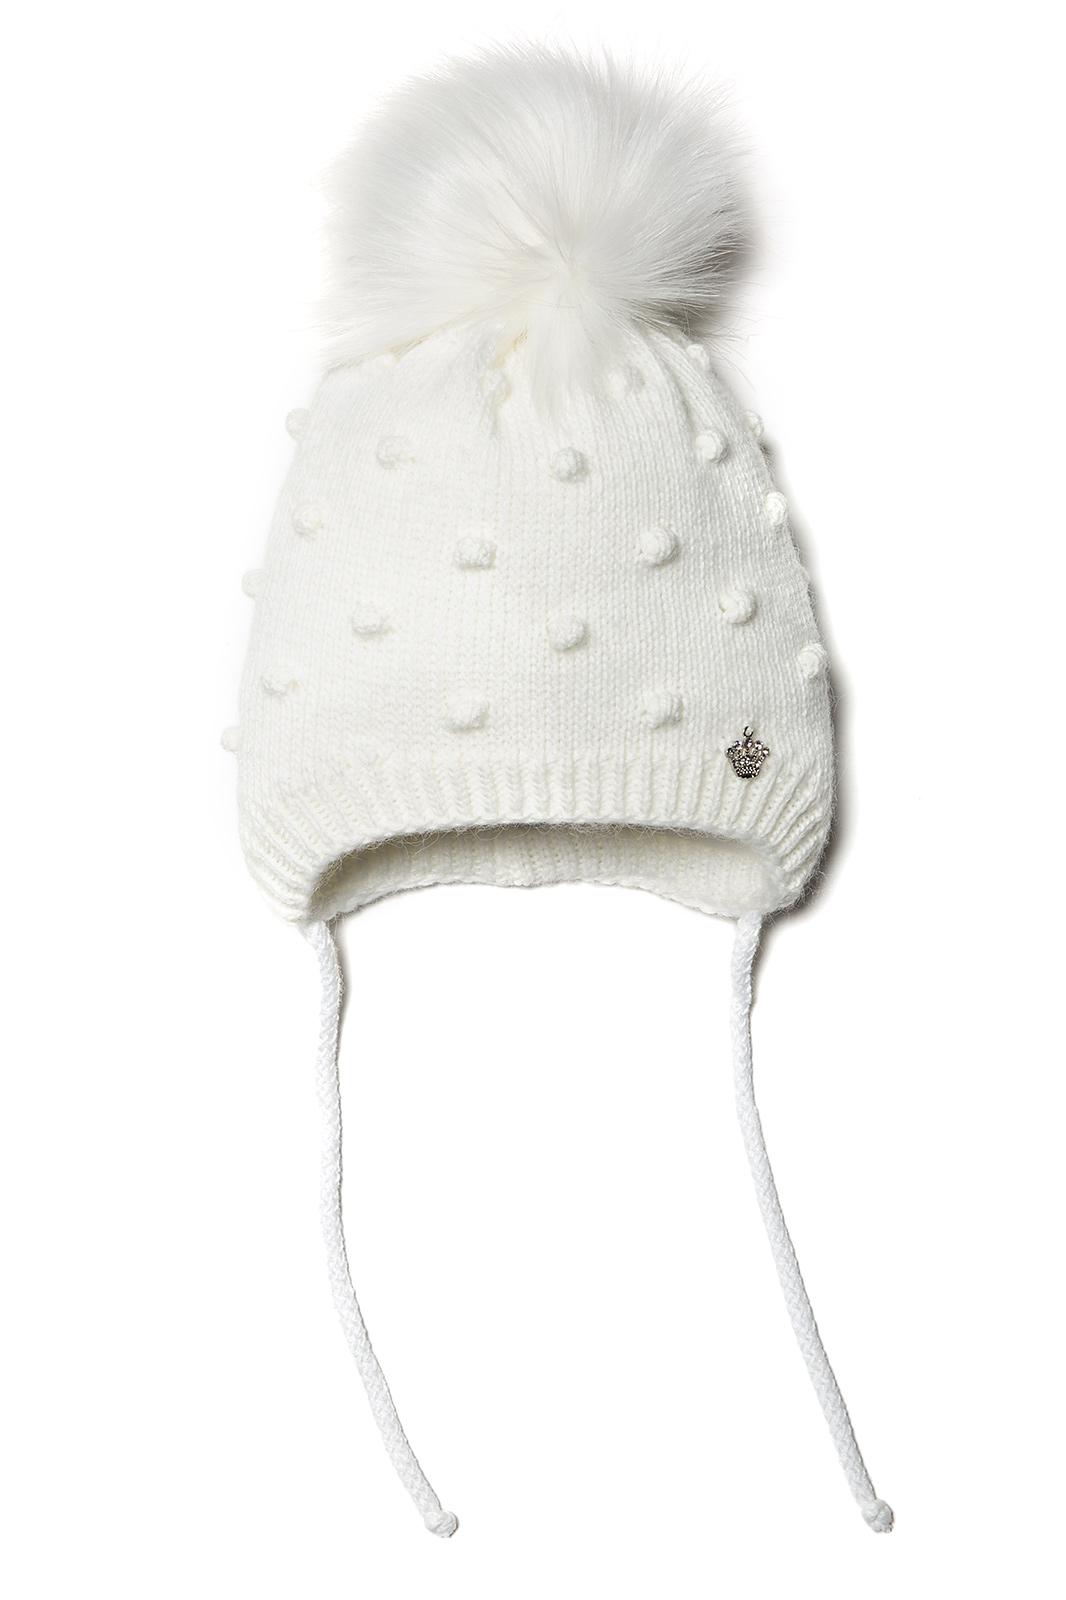 Conte/Esli Double knitted kids hat with cotton lining, with insulation and fur pom-pom - For Girls (18С-260СП)